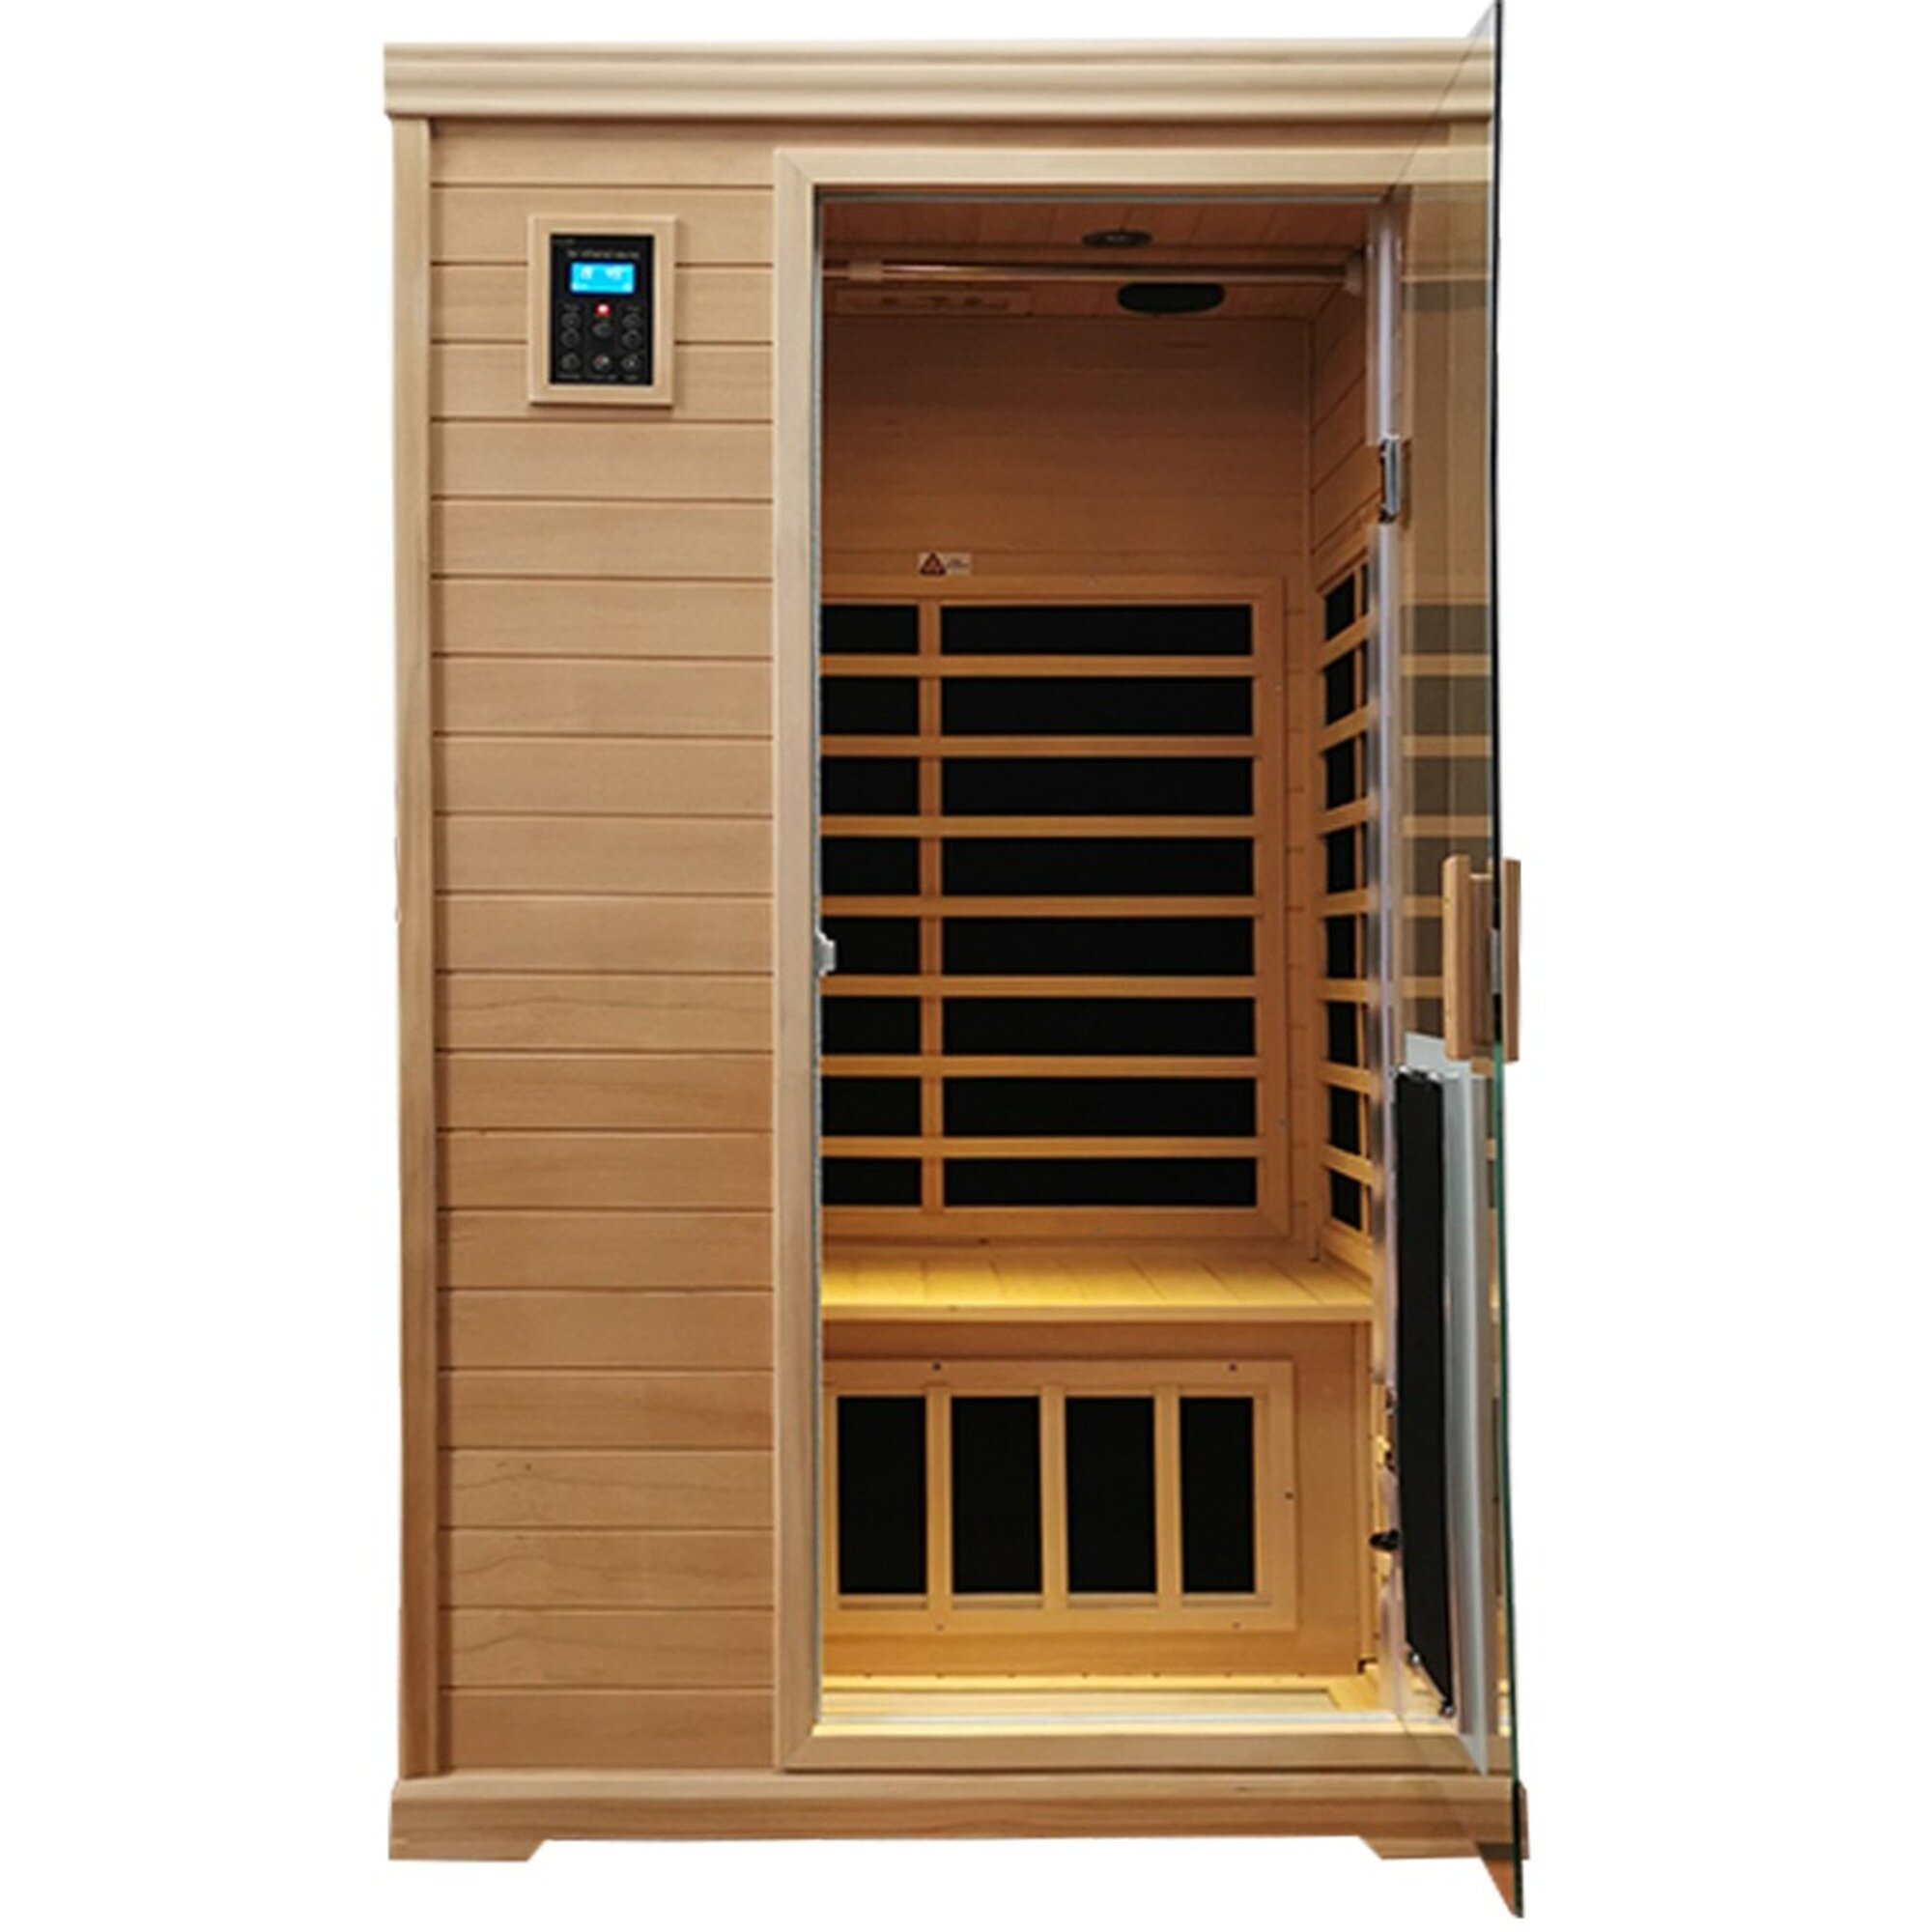 Details about   Portable Far Infrared Sauna One Person Saunas Home Spa w/ Foot Pad Folding Chair 